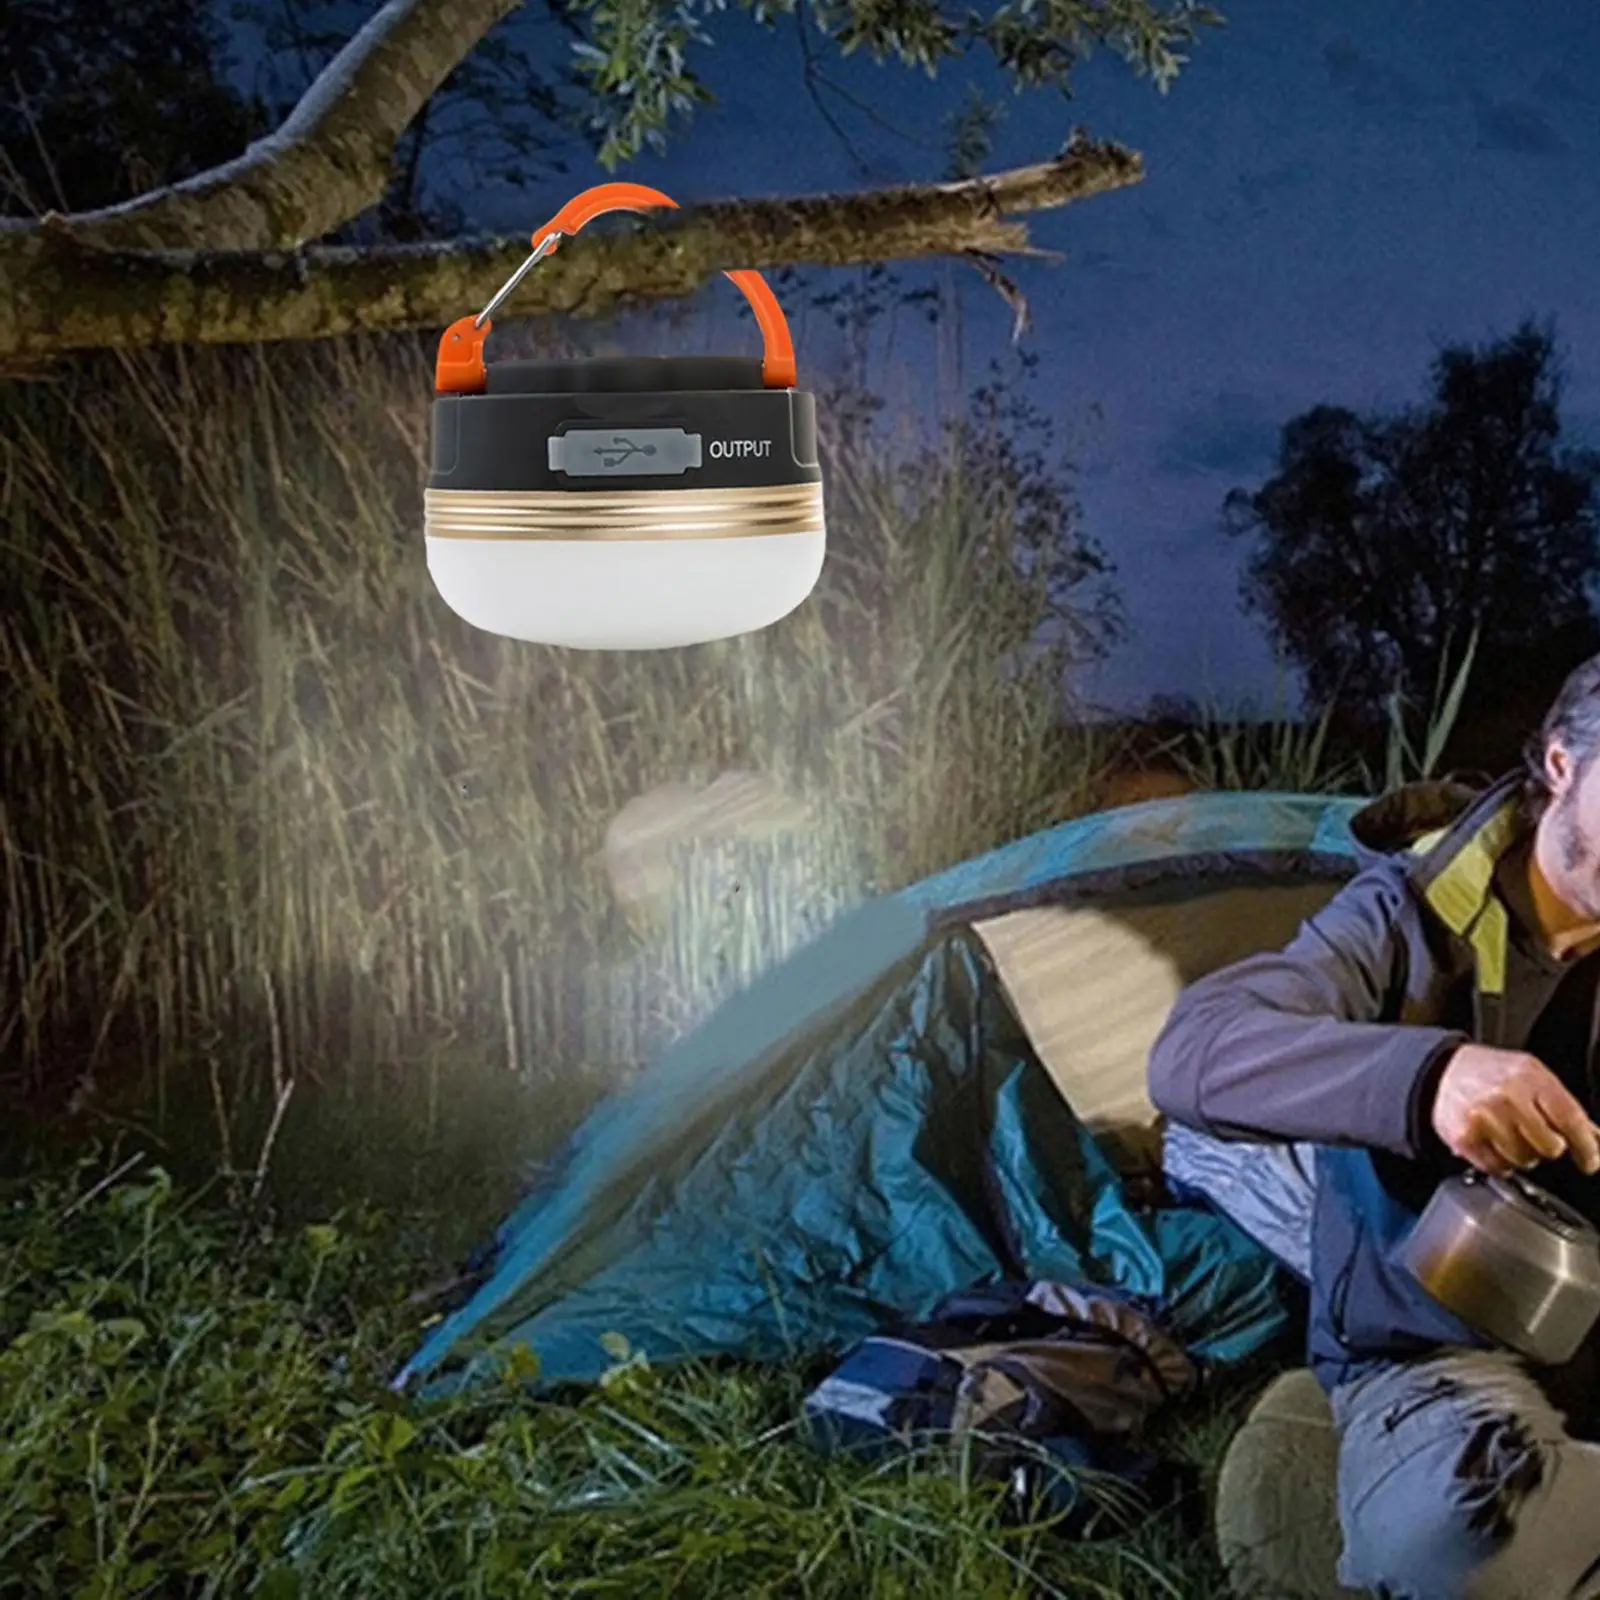 LED Camping Lantern Hanging Tent Light Electric Lantern for Survival Gear Emergency Hiking Camping Accessories Power Failure